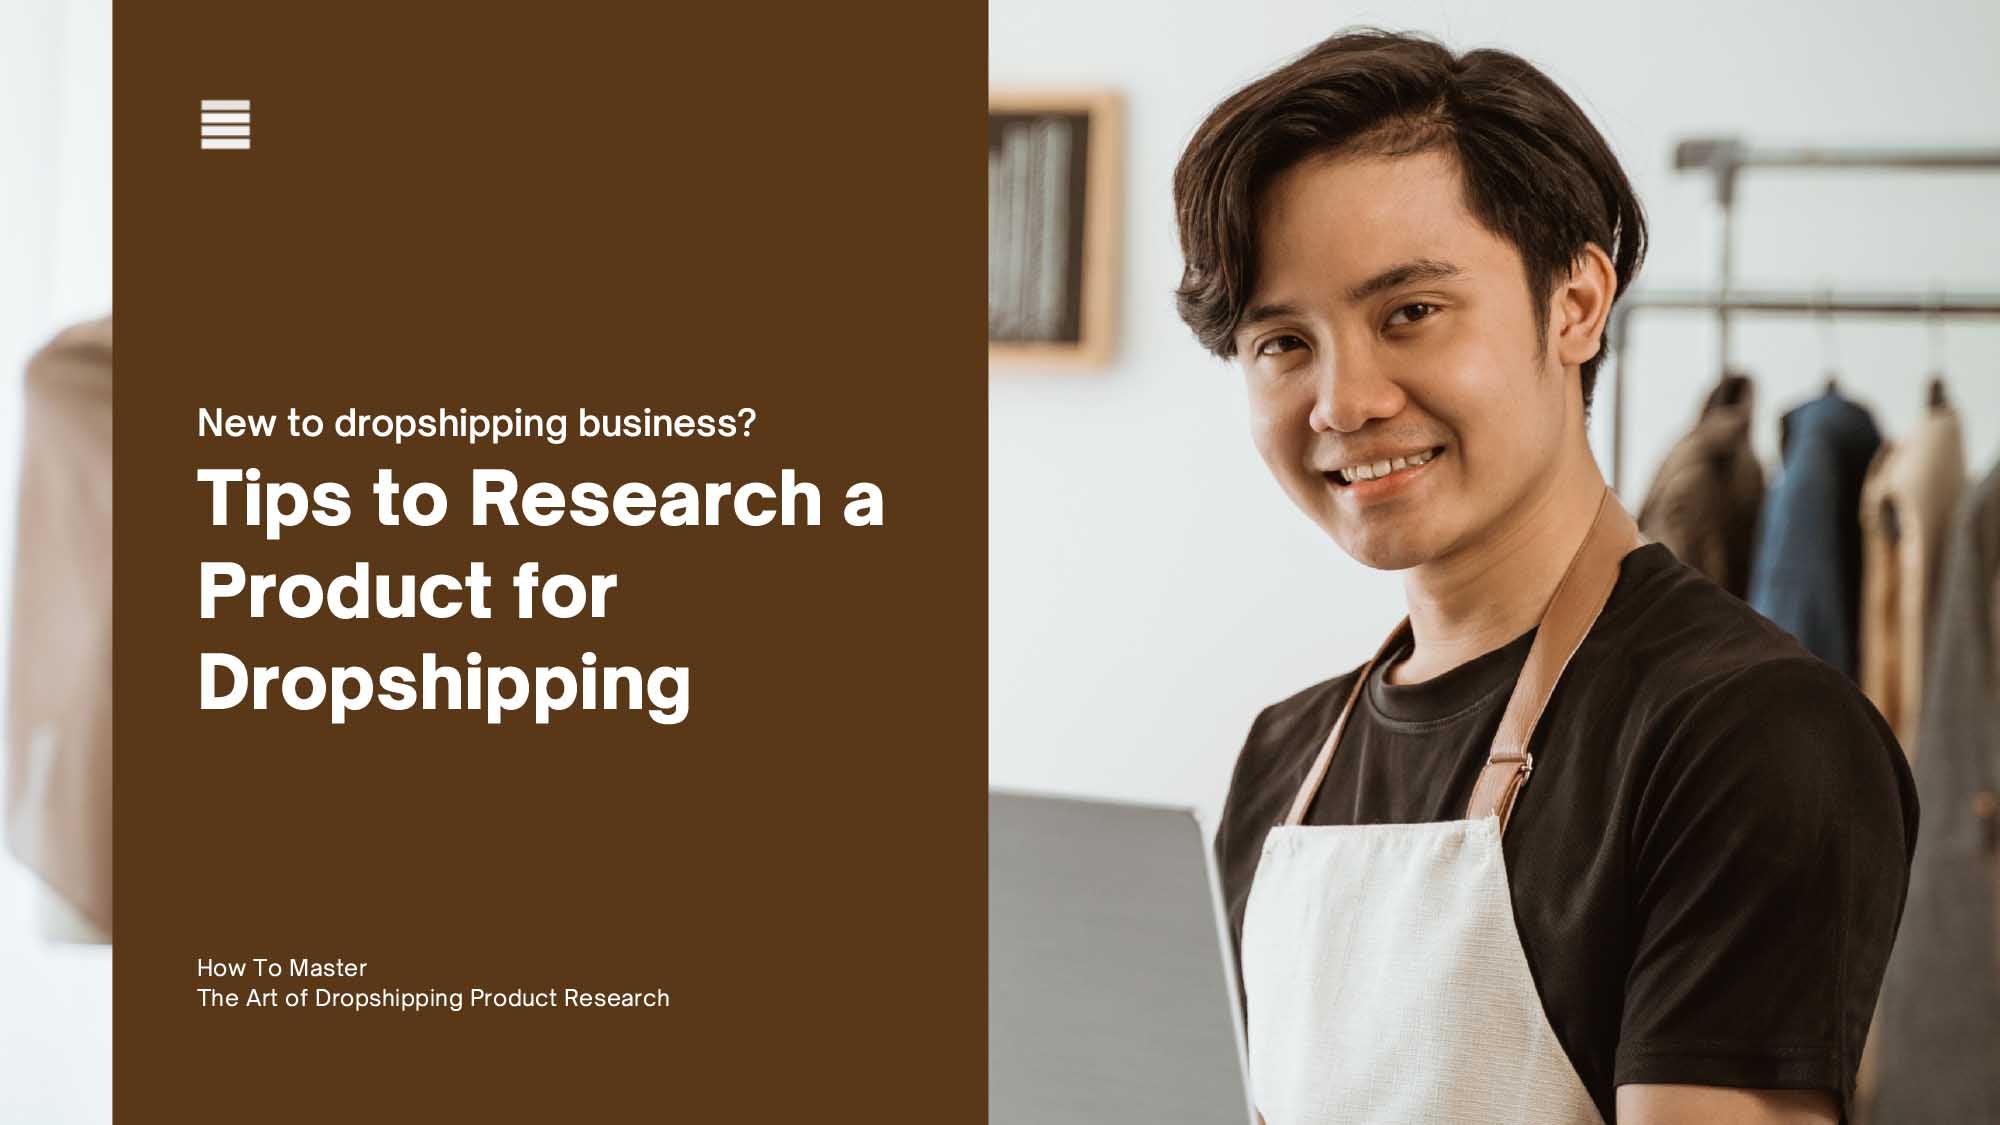 How To Master The Art of Dropshipping Product Research